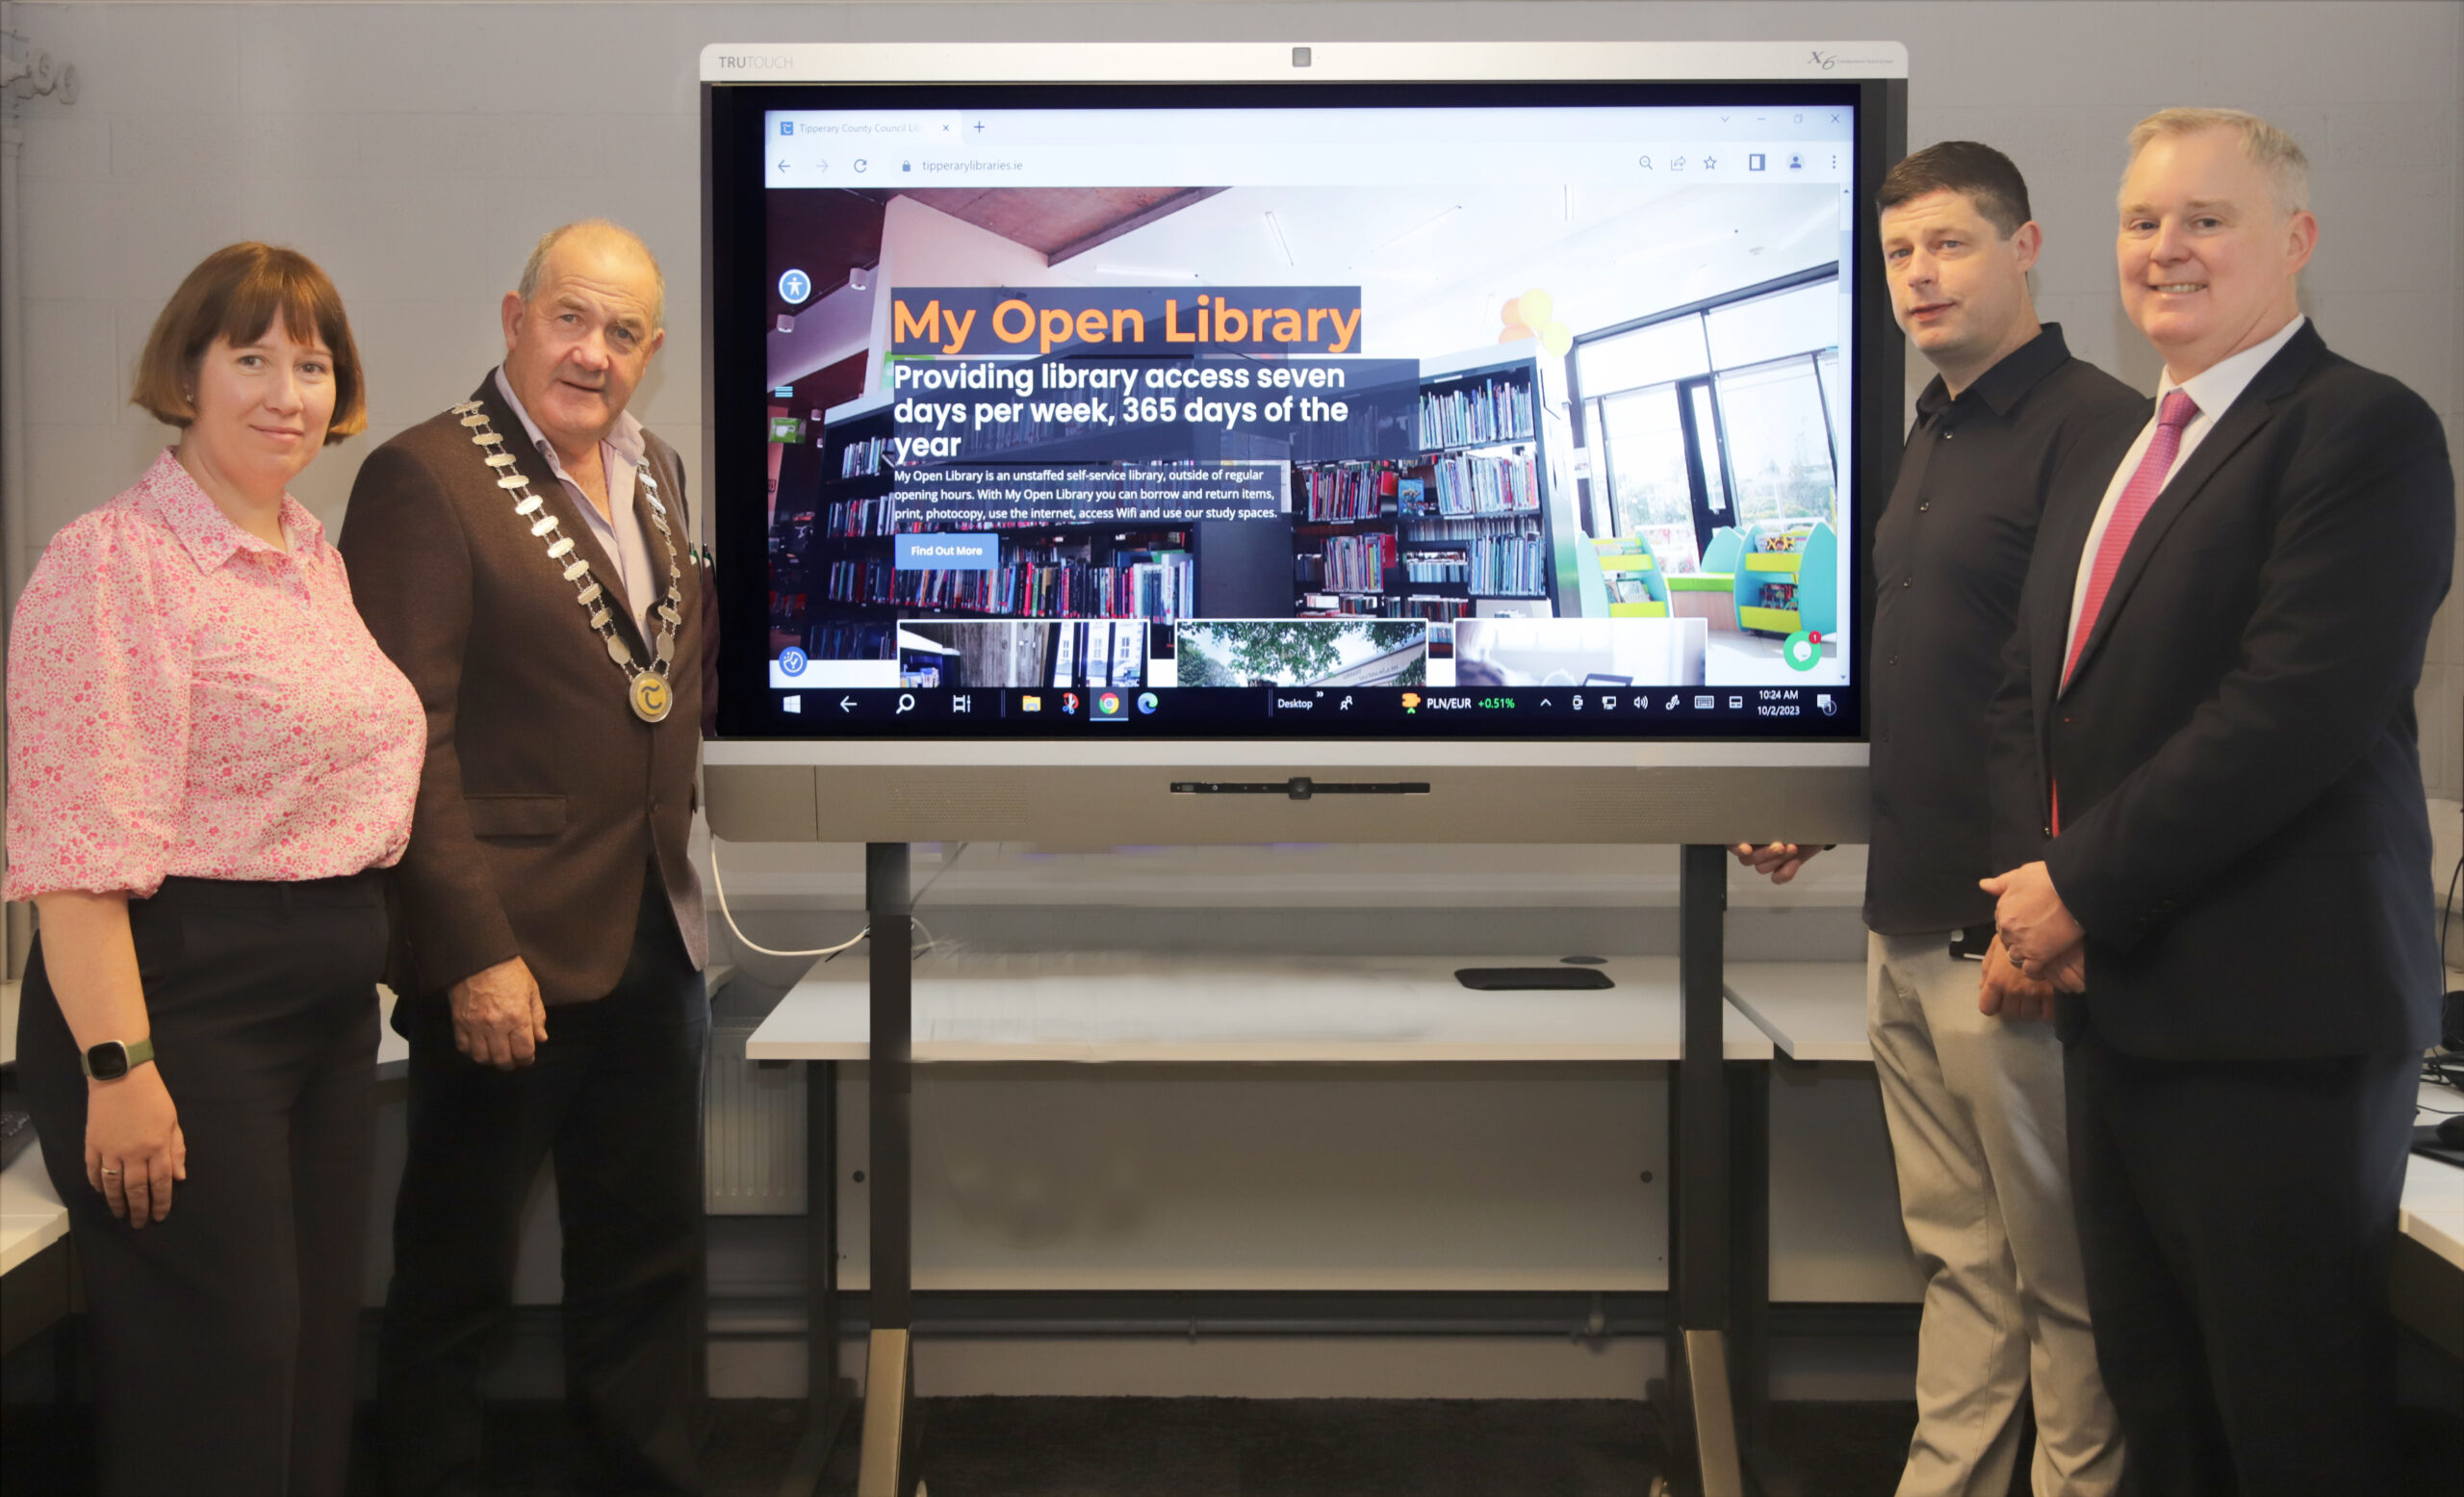 A picture of Ann Marie Brophy (Senior Executive Librarian), Councillor Ger Darcy (Cathaoirleach of Tipperary County Council), Greg MacDonald (Library Assistant) and Damien Dullaghan (County Librarian) launching the new library website in Nenagh library.